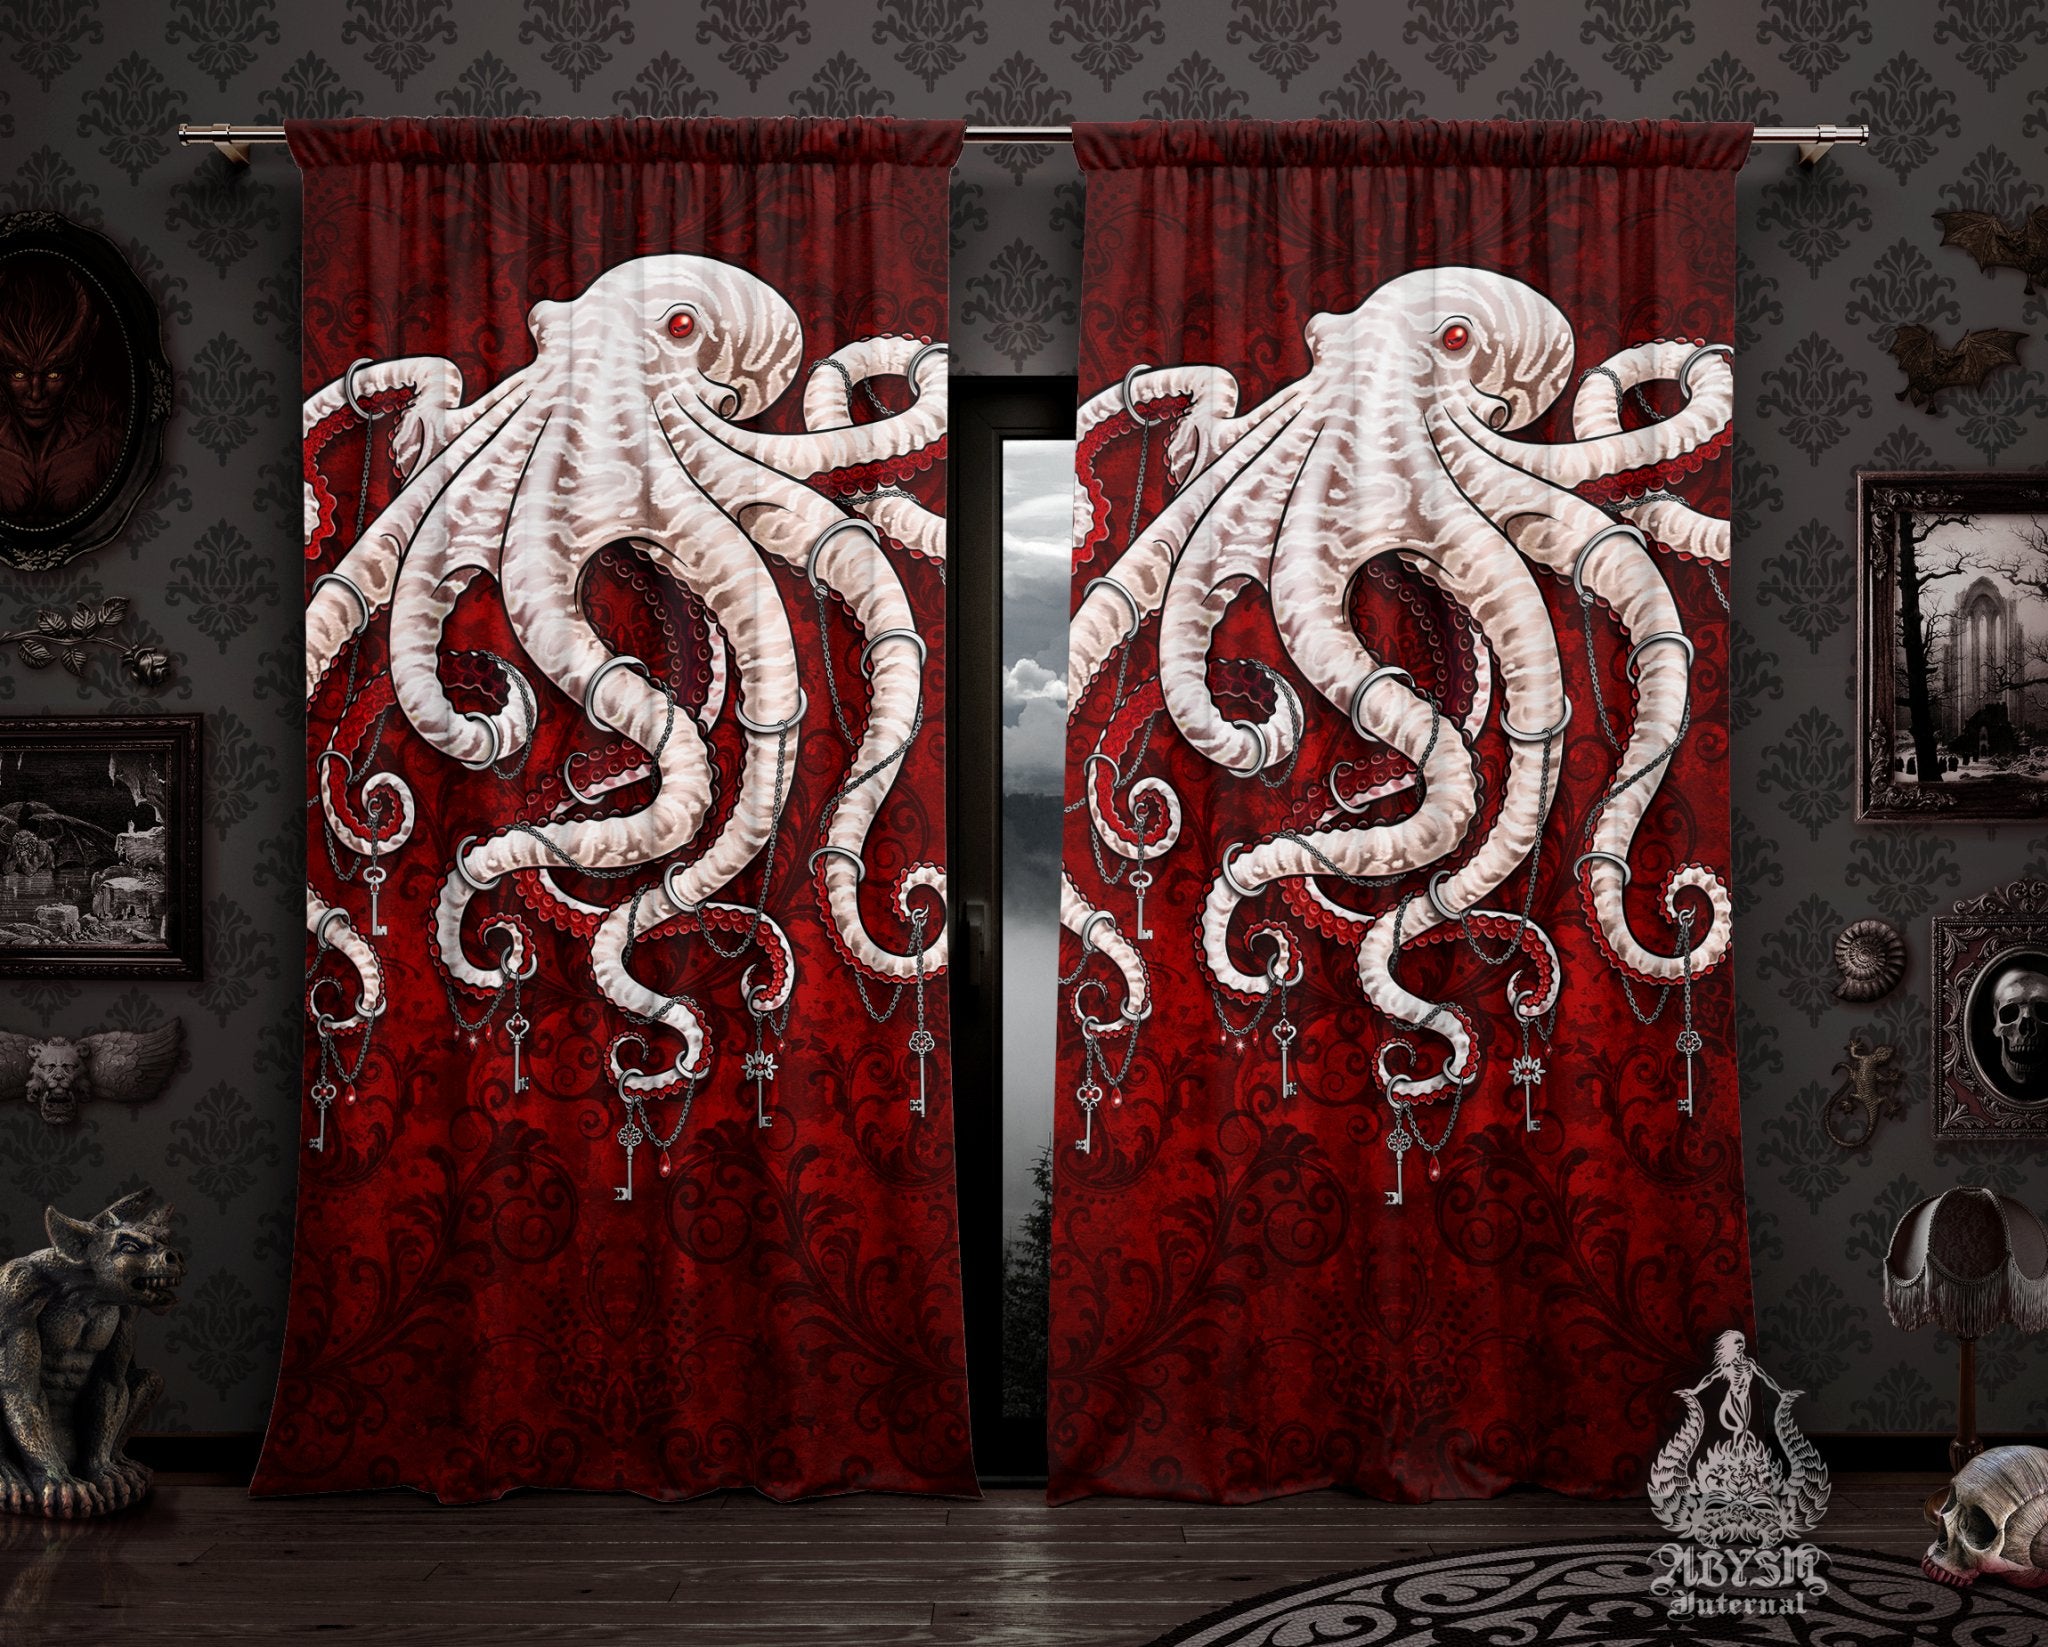 Goth Red Curtains, 50x84' Printed Window Panels, Octopus Art Print, Gothic Home Decor - Bloody White - Abysm Internal